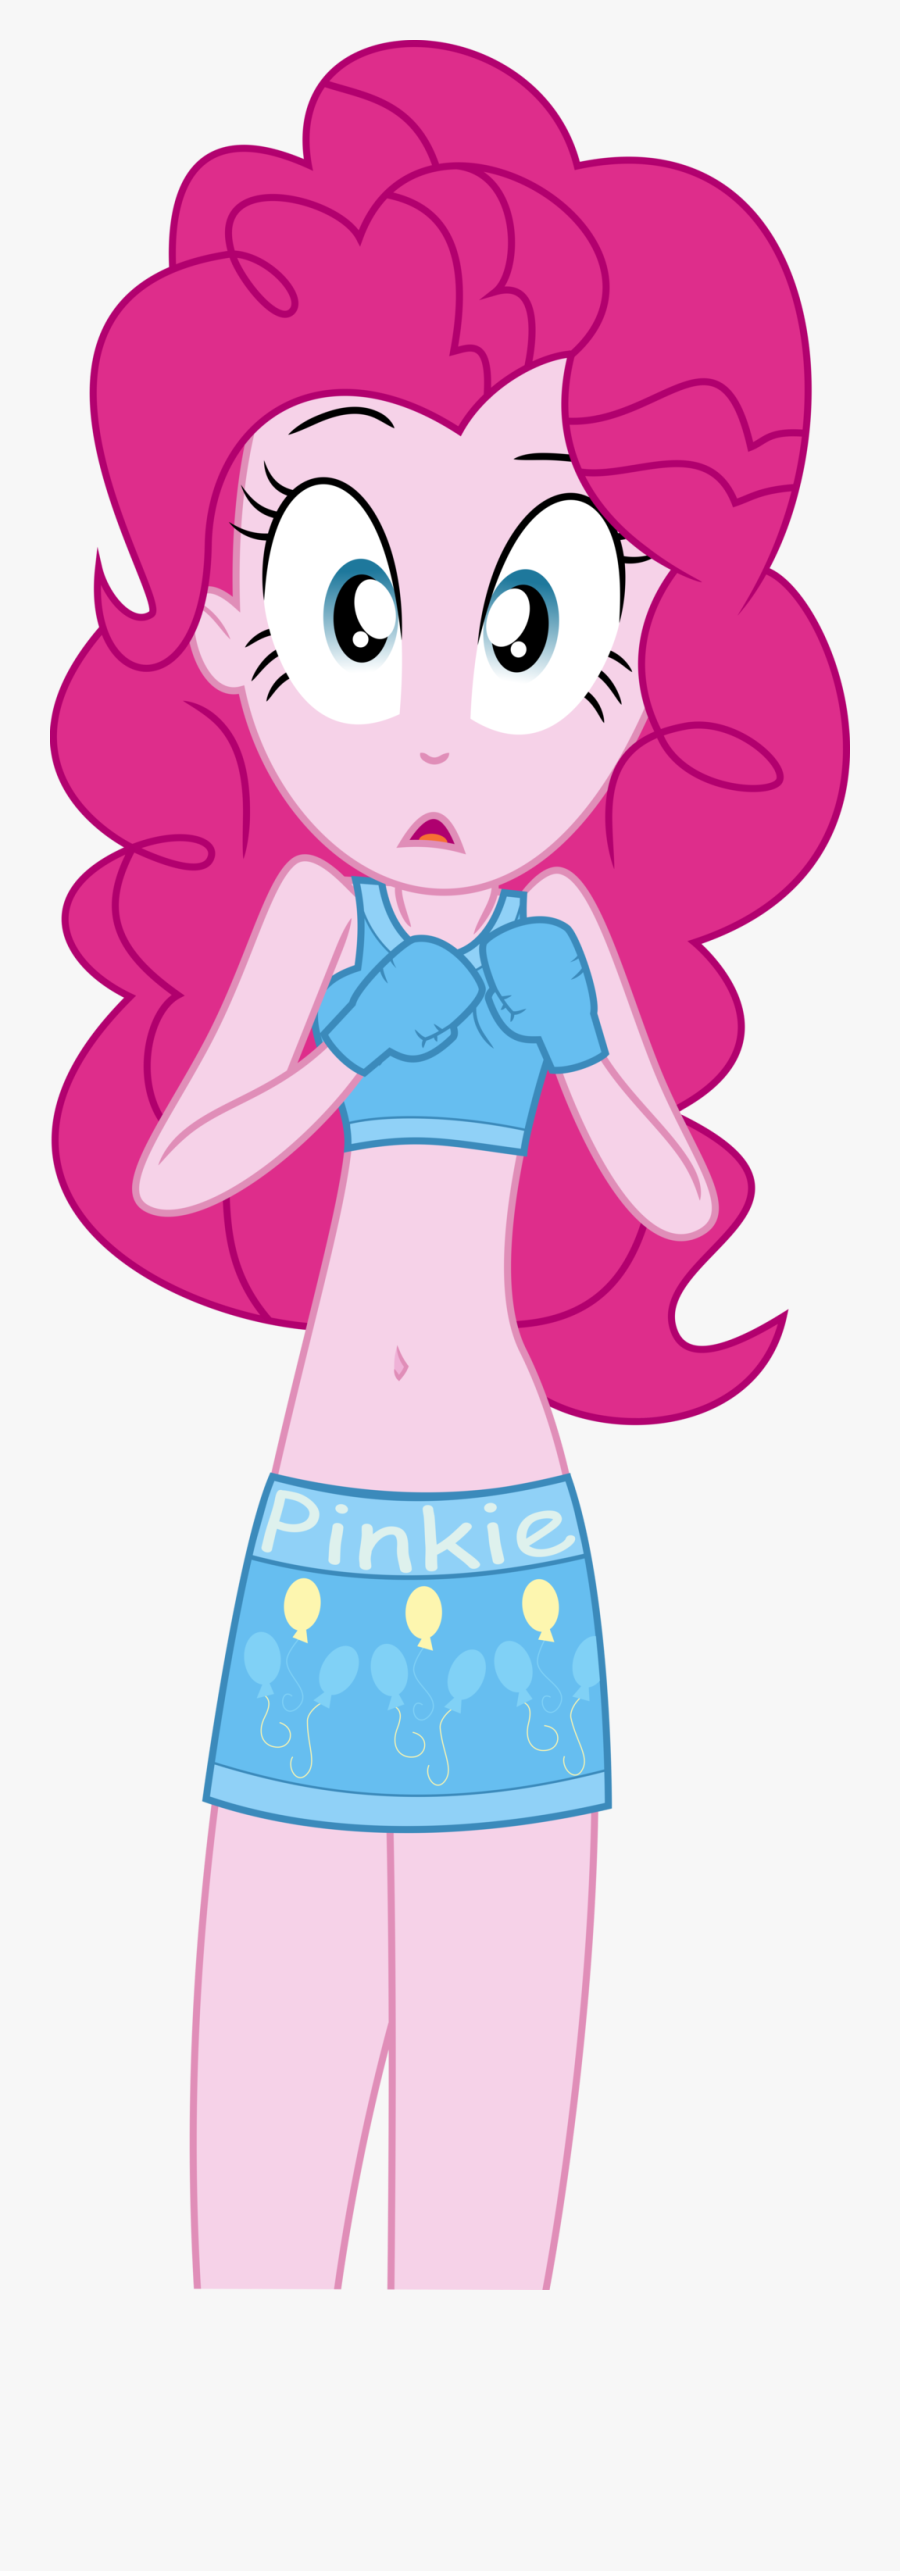 Short Clipart Boxing Shorts - Pinkie Pie My Little Pony Belly, Transparent Clipart